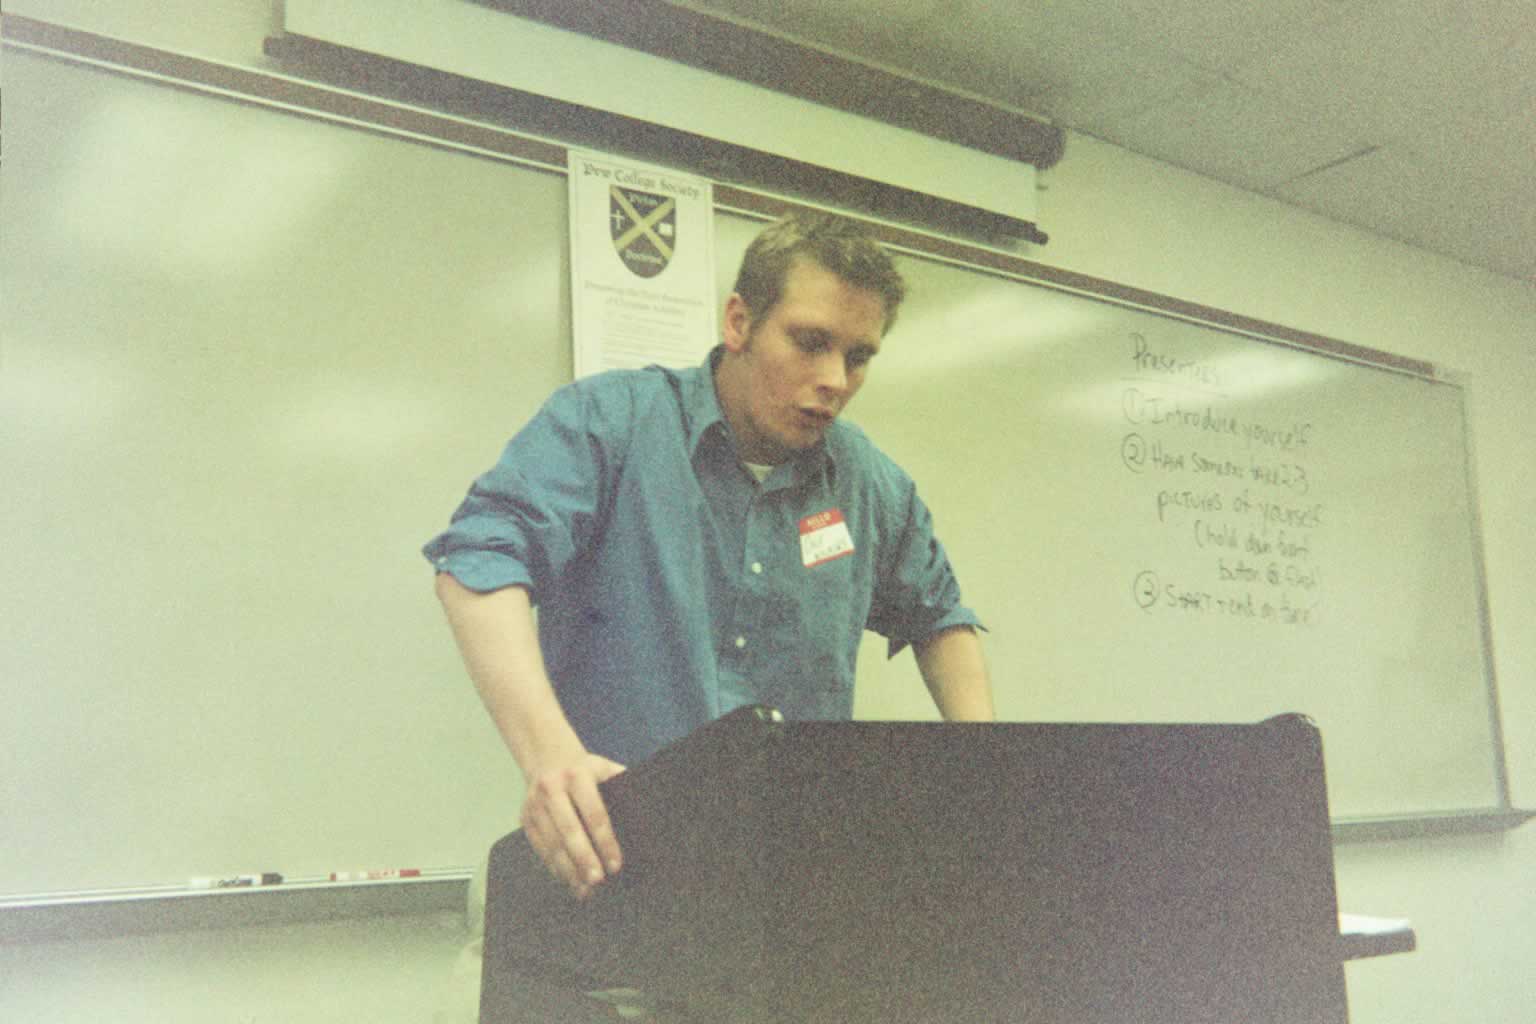 picture of a man in a blue shirt standing behind a podium speaking